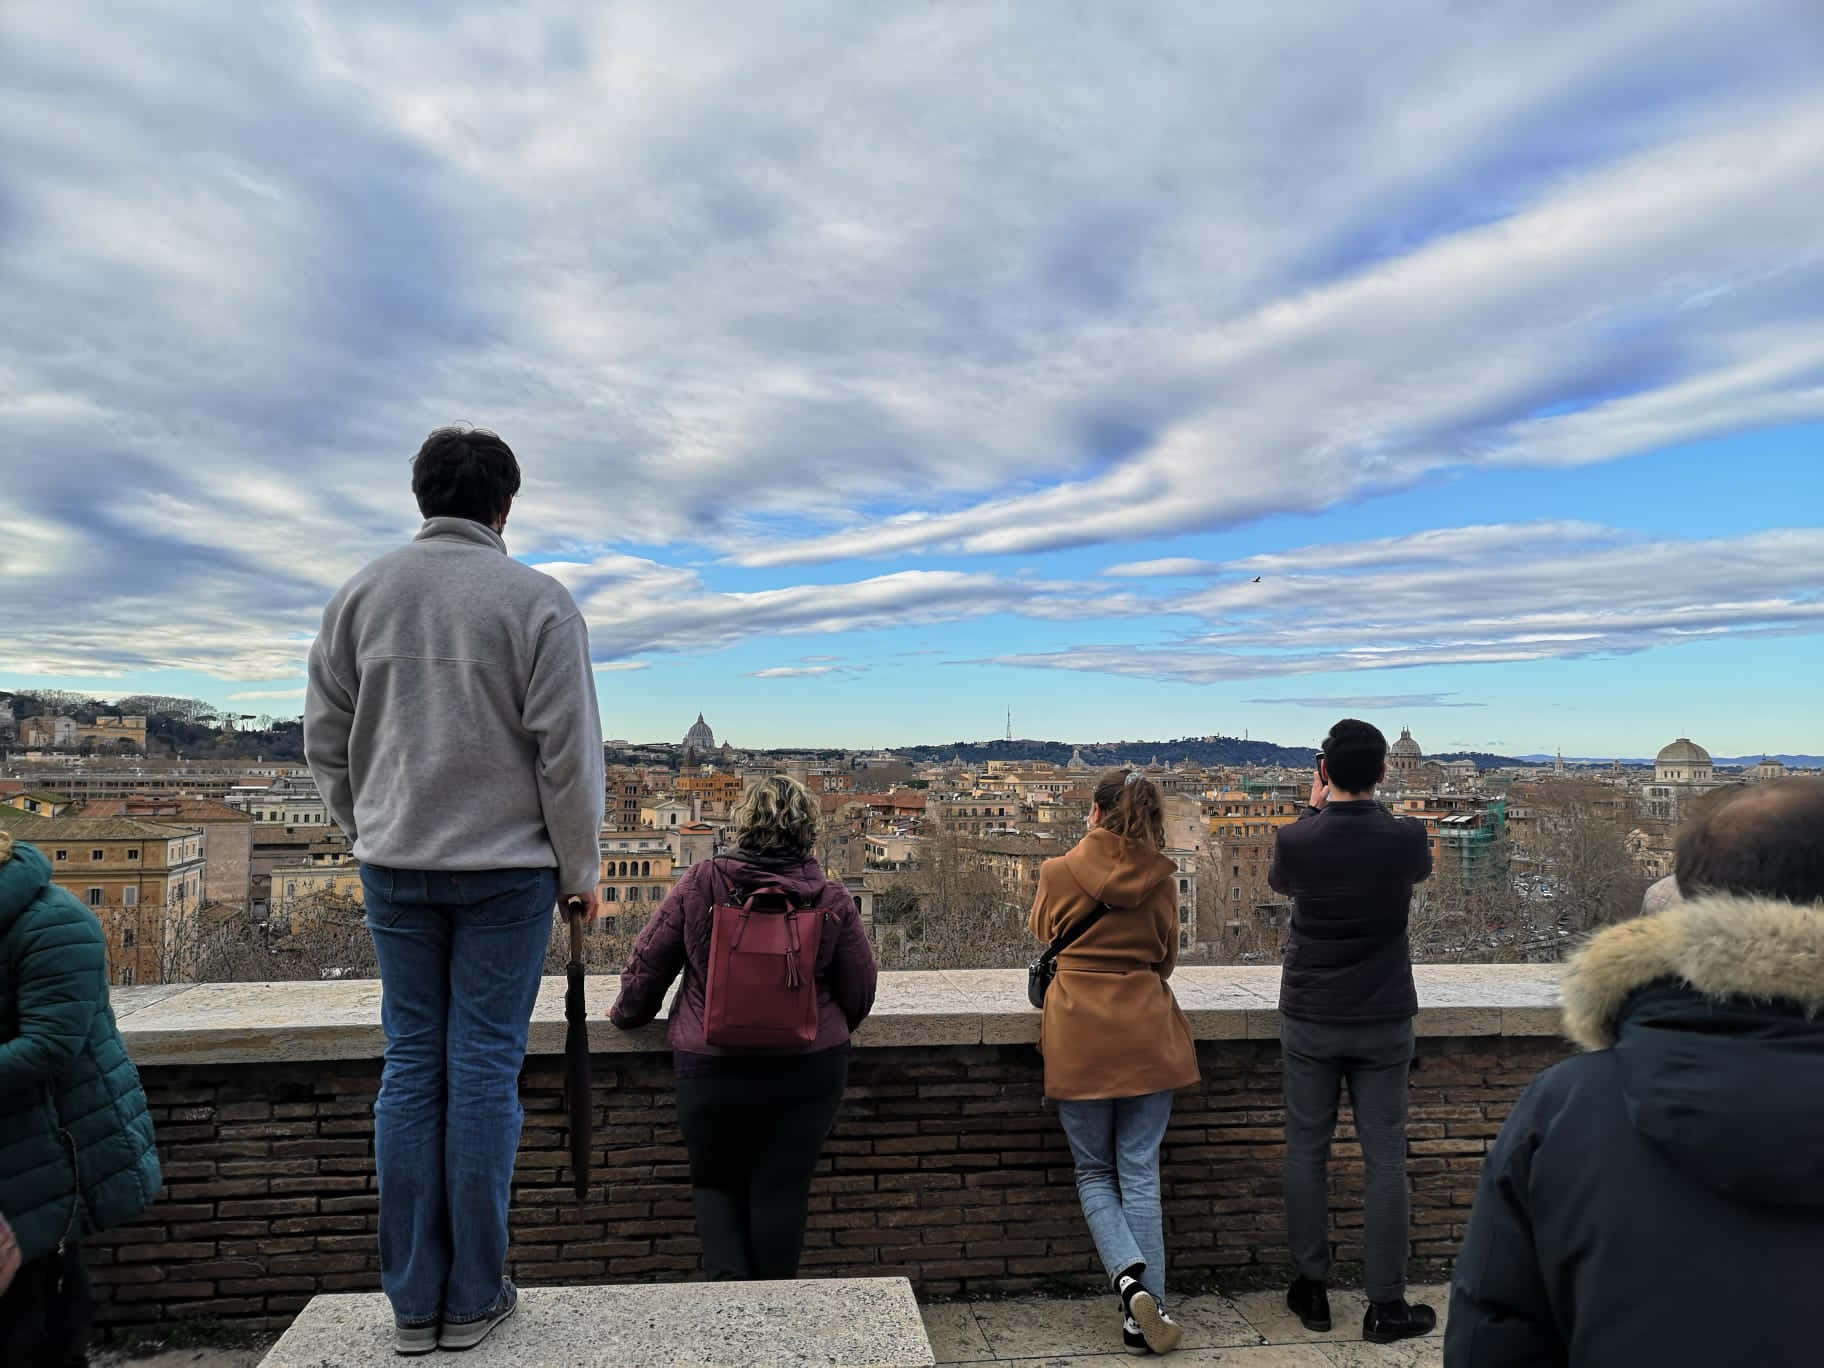 Taking in the view from the Aventine Hill towards St. Peter's